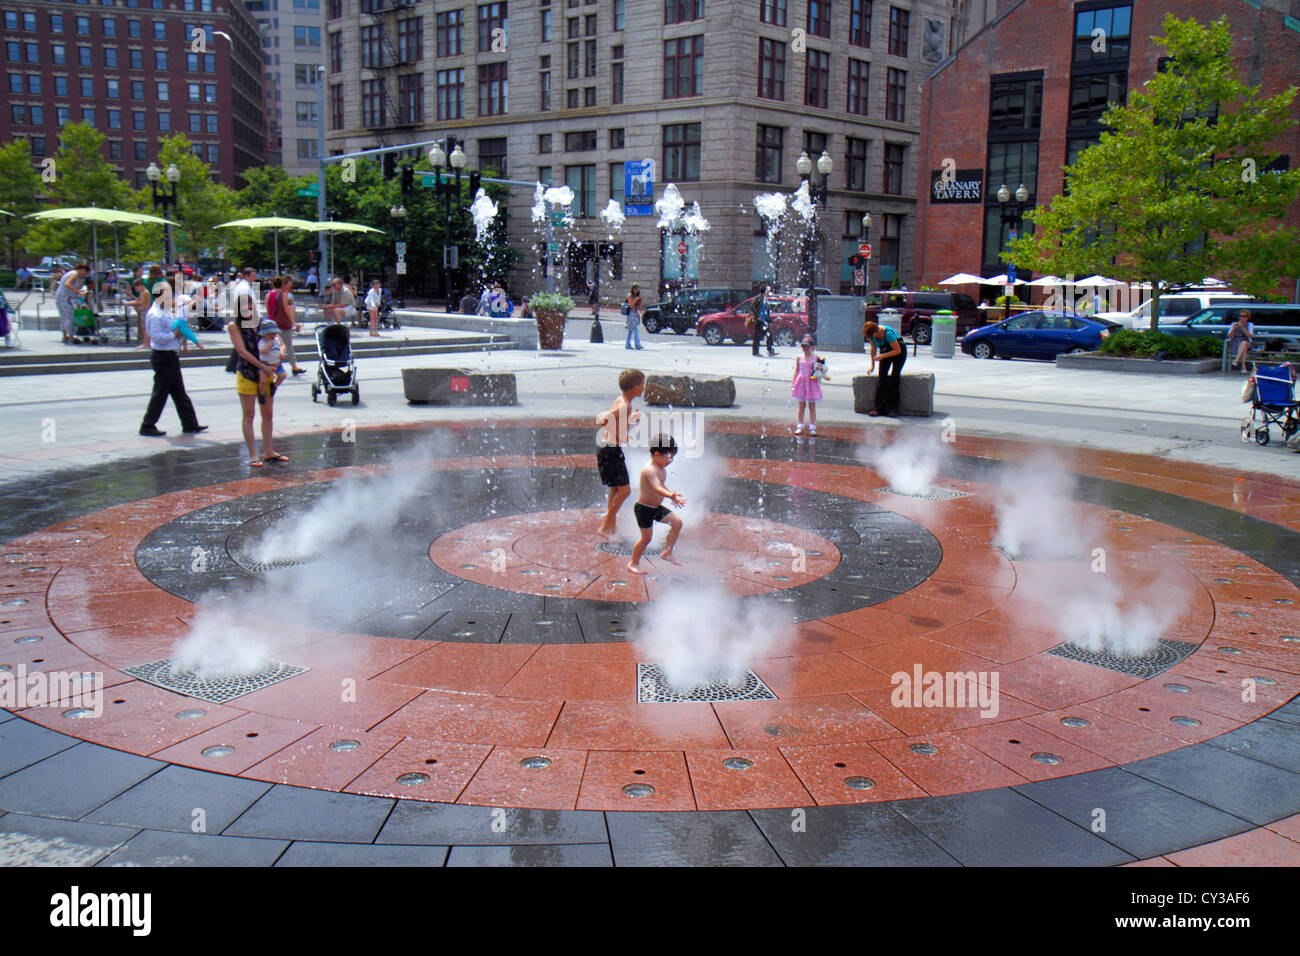 Boston Massachusetts,State Street,Rose Kennedy Greenway,Rings Fountain,boy boys,male kid kids child children youngster,playing,mist,public,water,MA120 Stock Photo